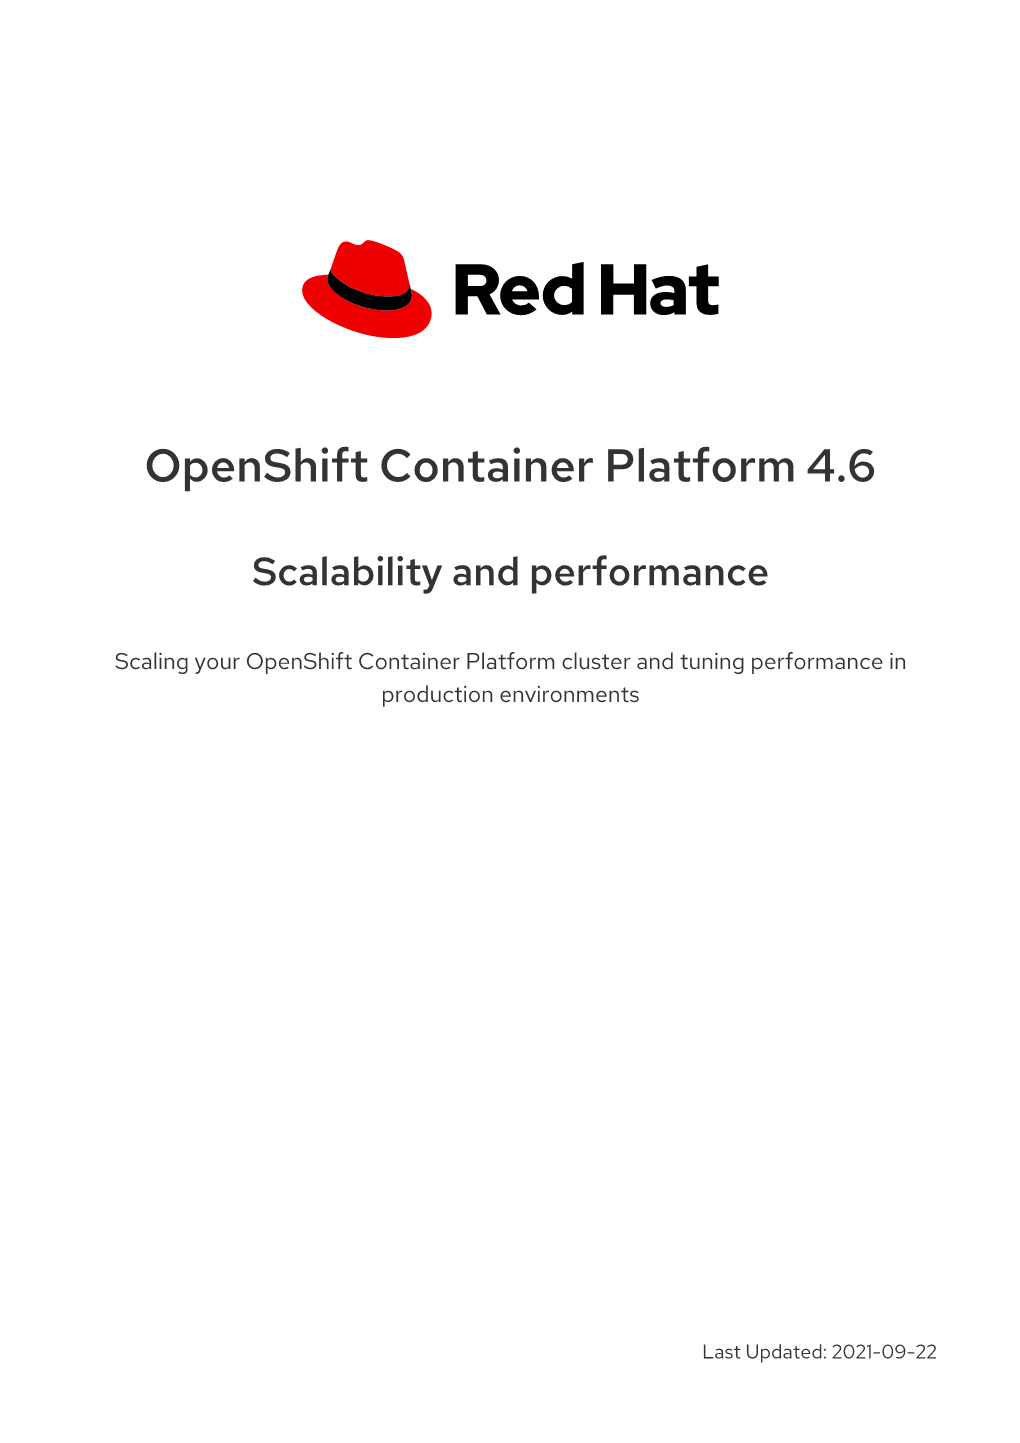 Openshift Container Platform 4.6 Scalability and Performance